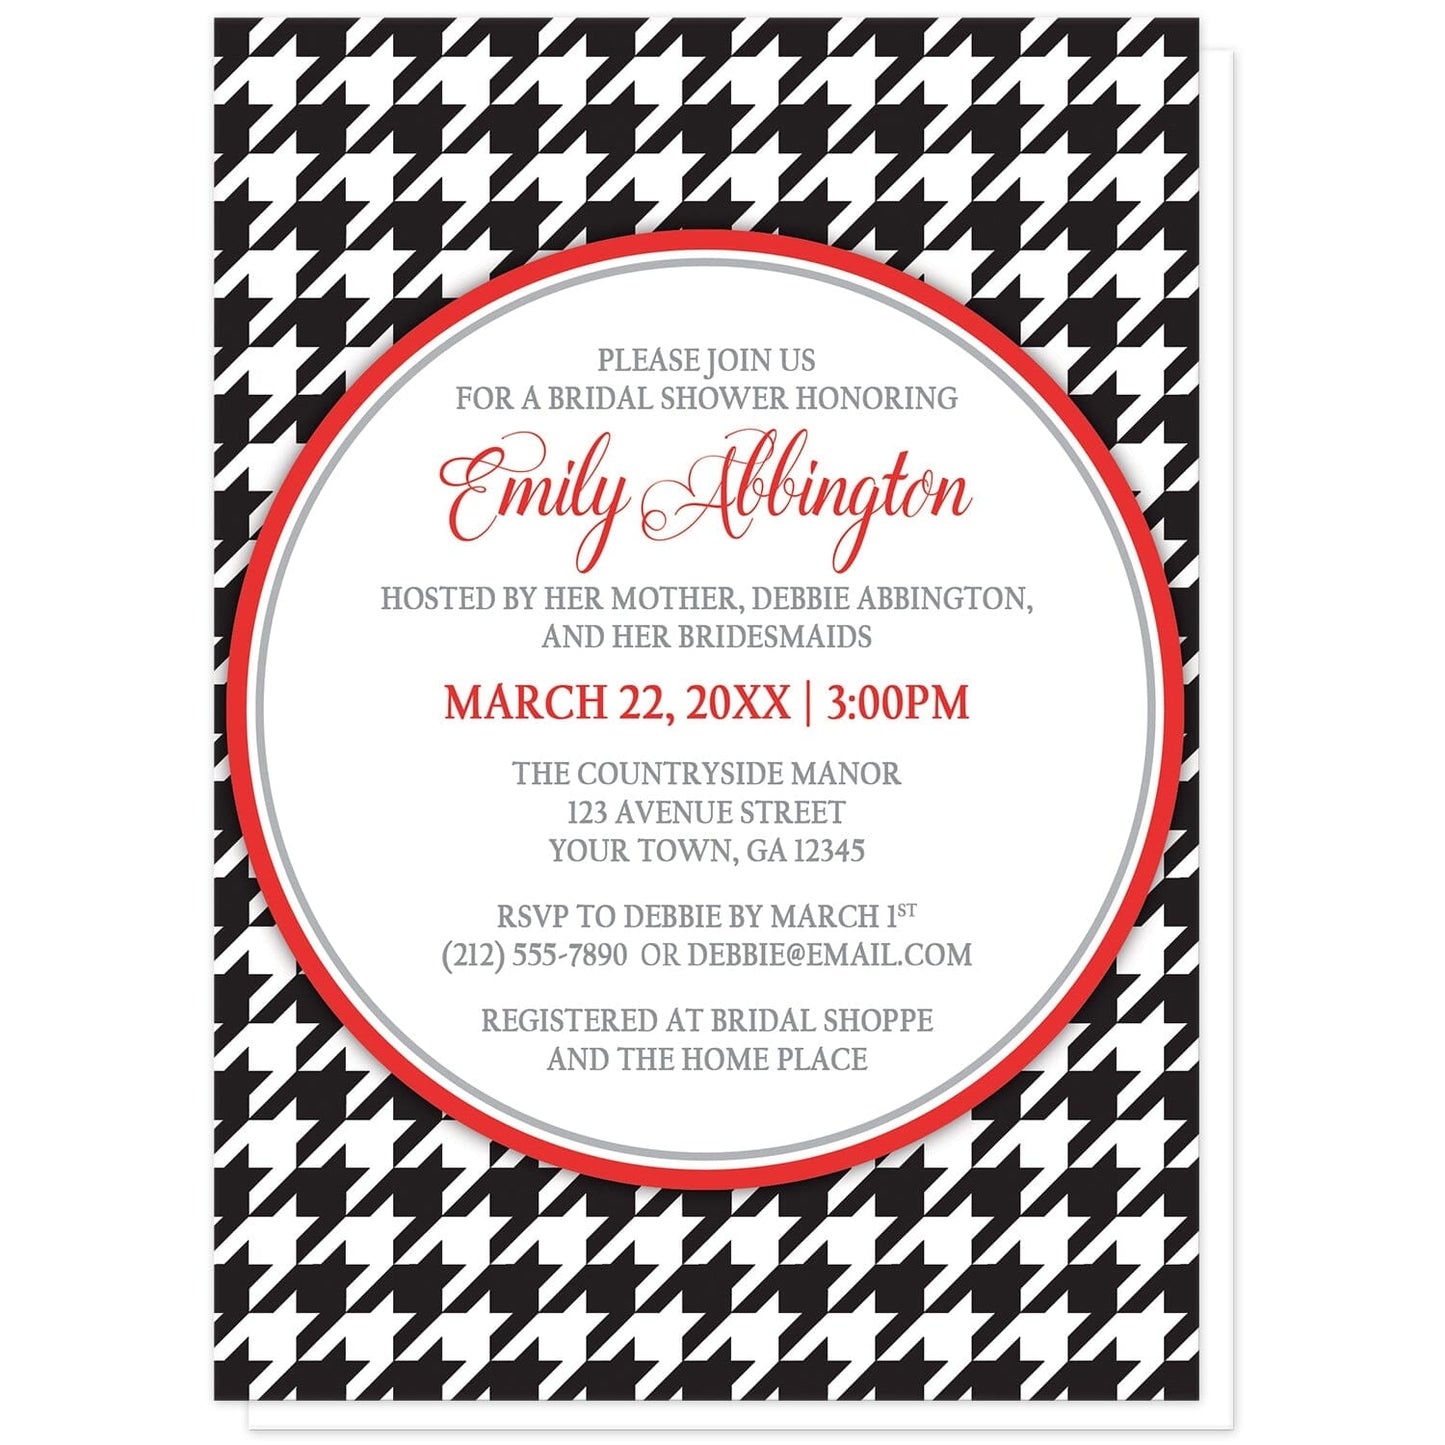 Stylish Black Houndstooth Red Bridal Shower Invitations at Artistically Invited. Stylish black houndstooth red bridal shower invitations with your personalized bridal shower celebration details custom printed in red and gray inside a white circle over a black and white houndstooth pattern. 